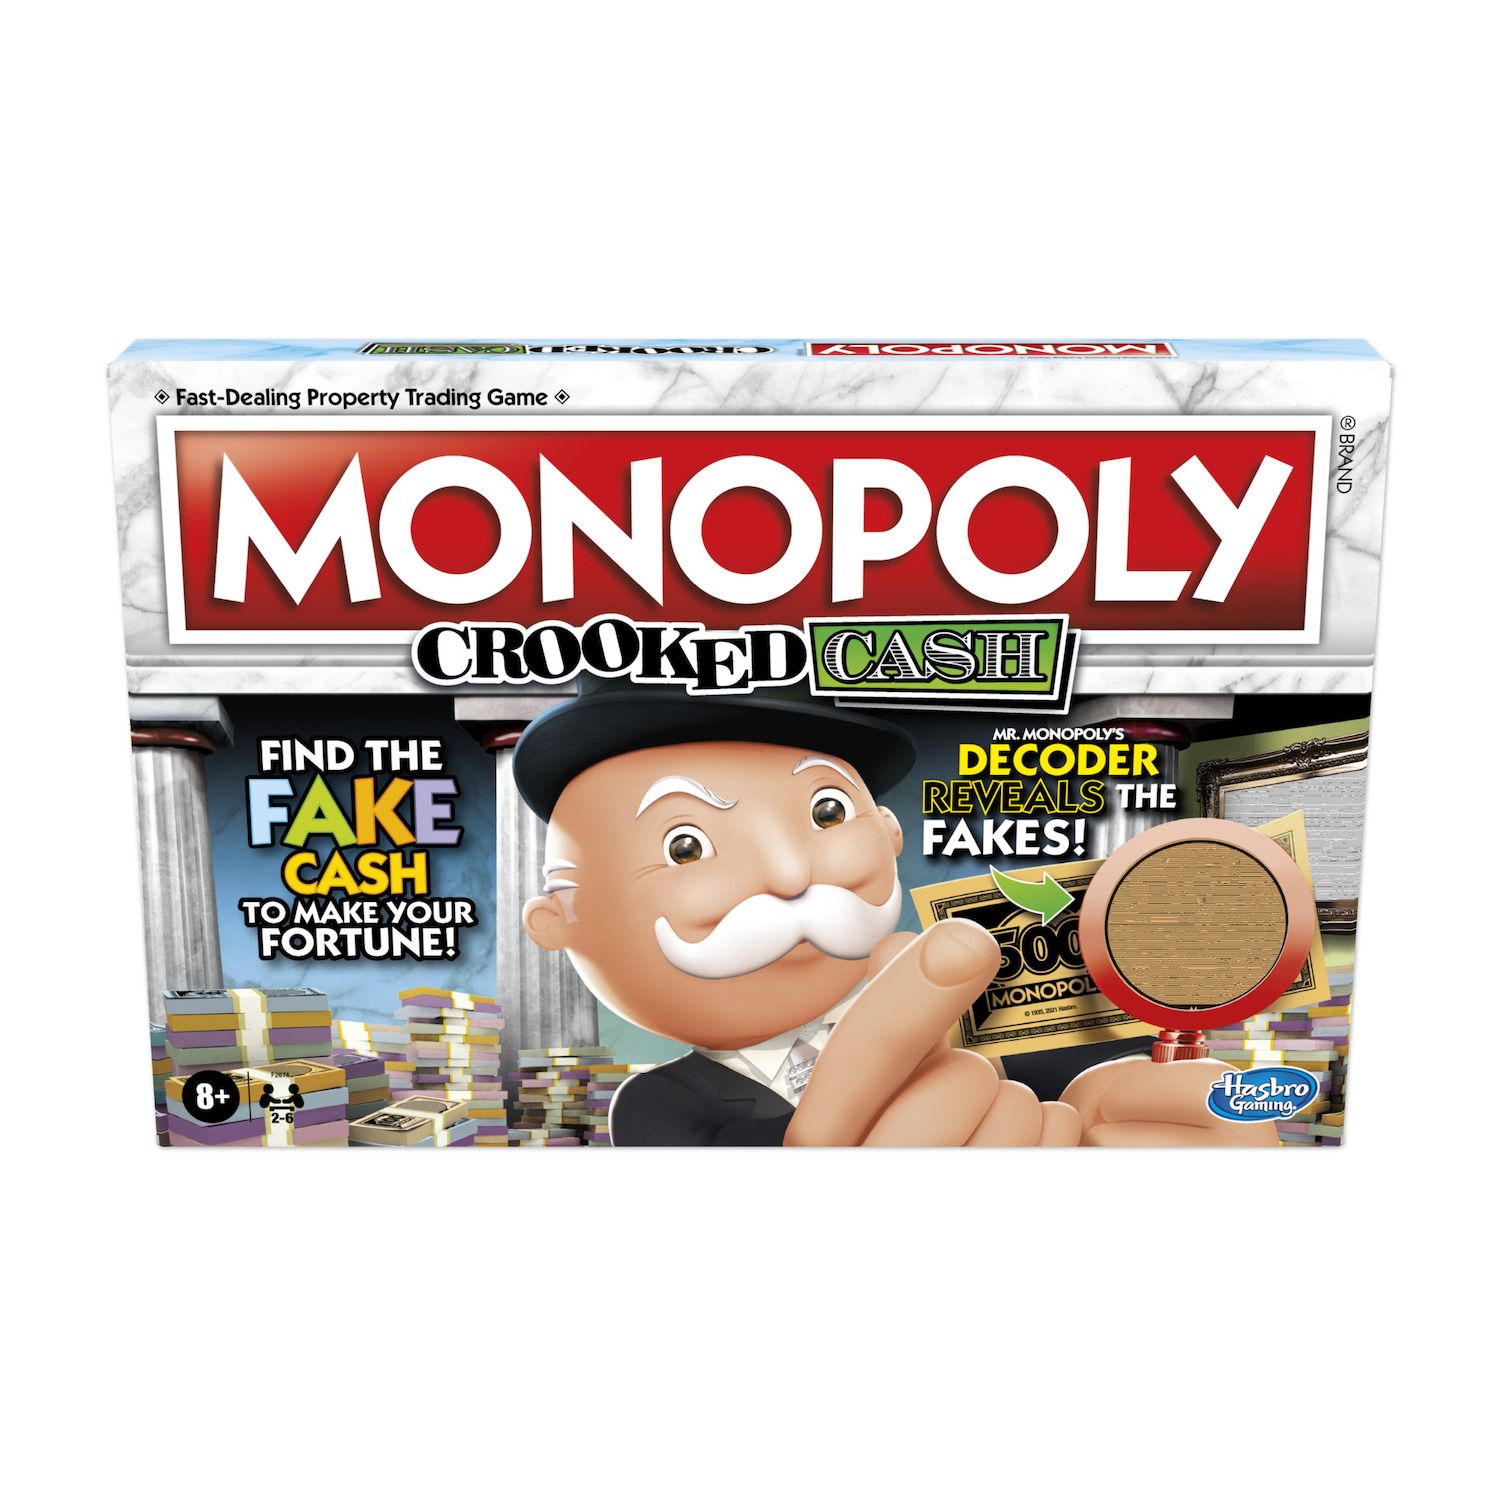 Image for Hasbro Monopoly Crooked Cash Game by at Kohl's.